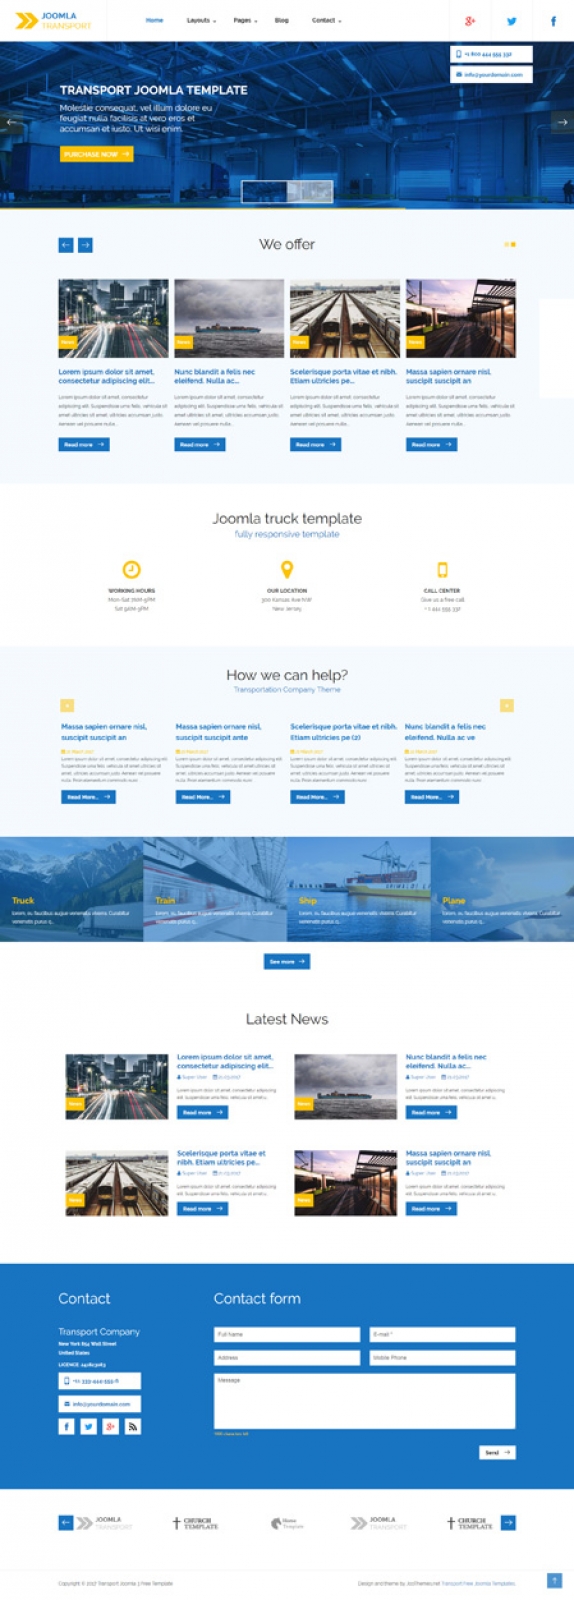 Transport Joomla 3 Free Template frontpage layout with extra modules
